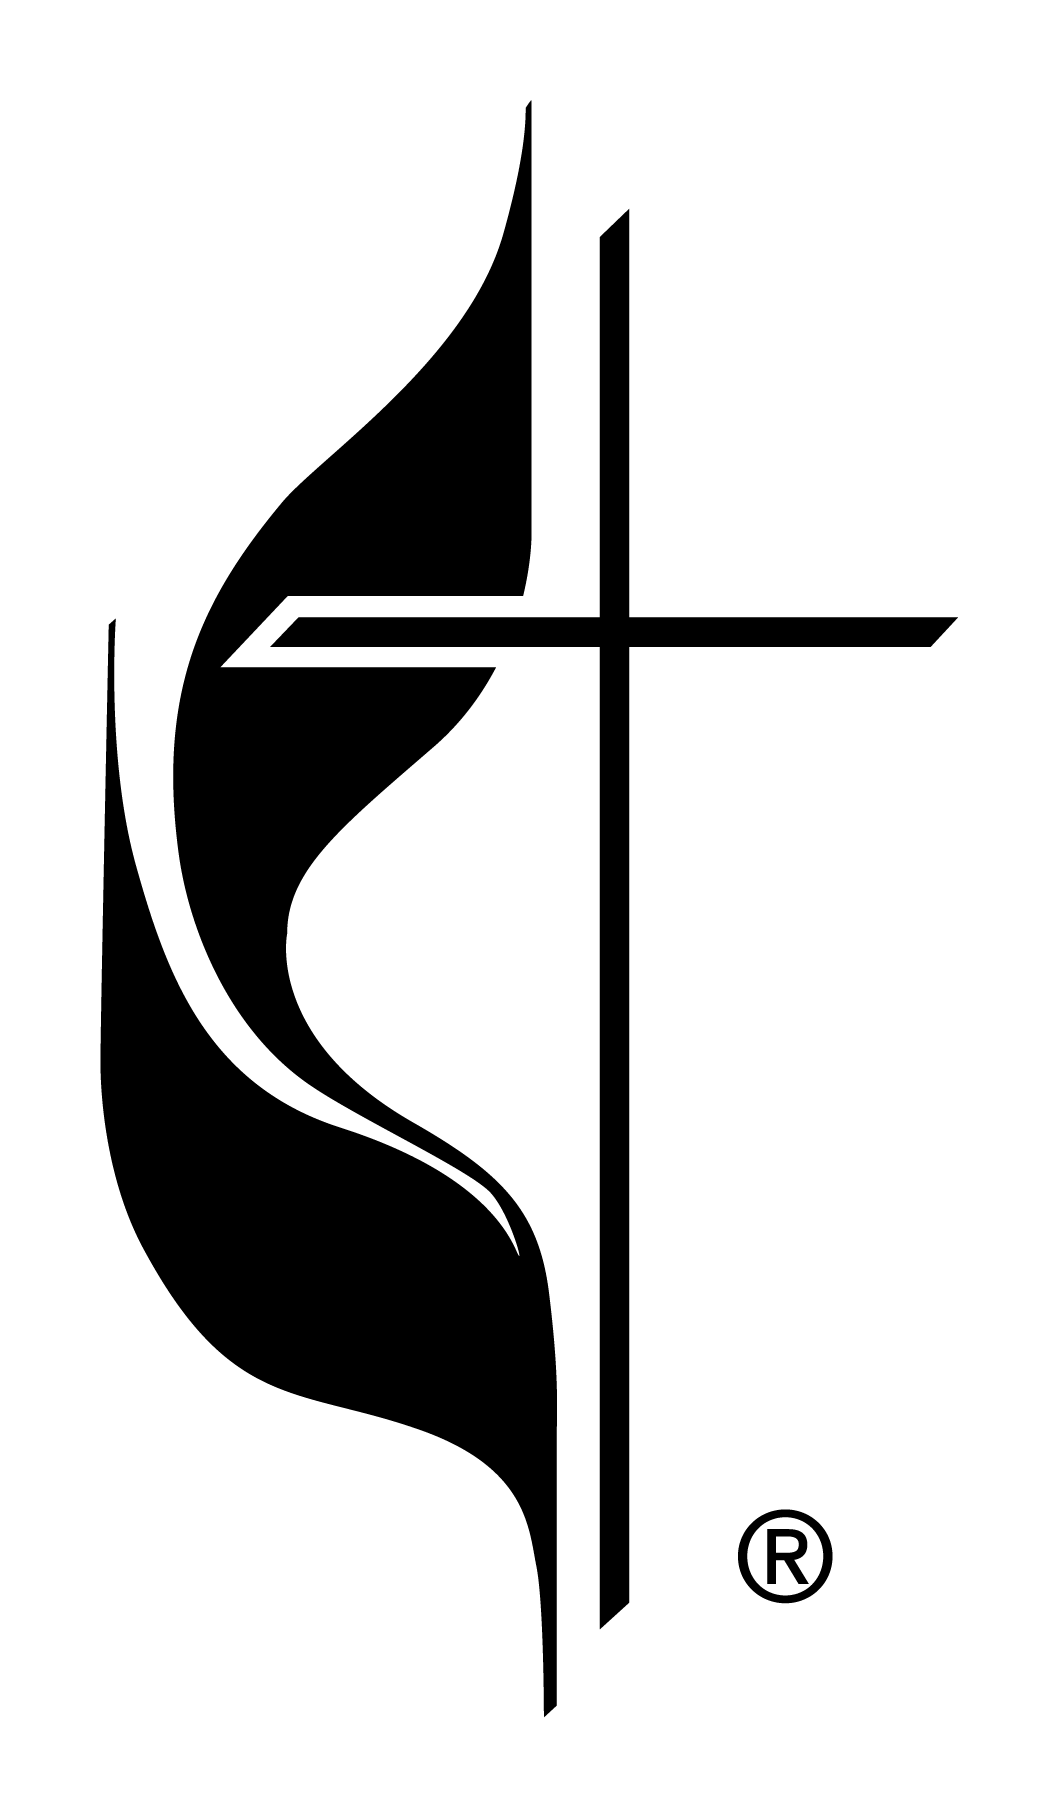 Flaming W Logo - Cross and Flame – The United Methodist Church